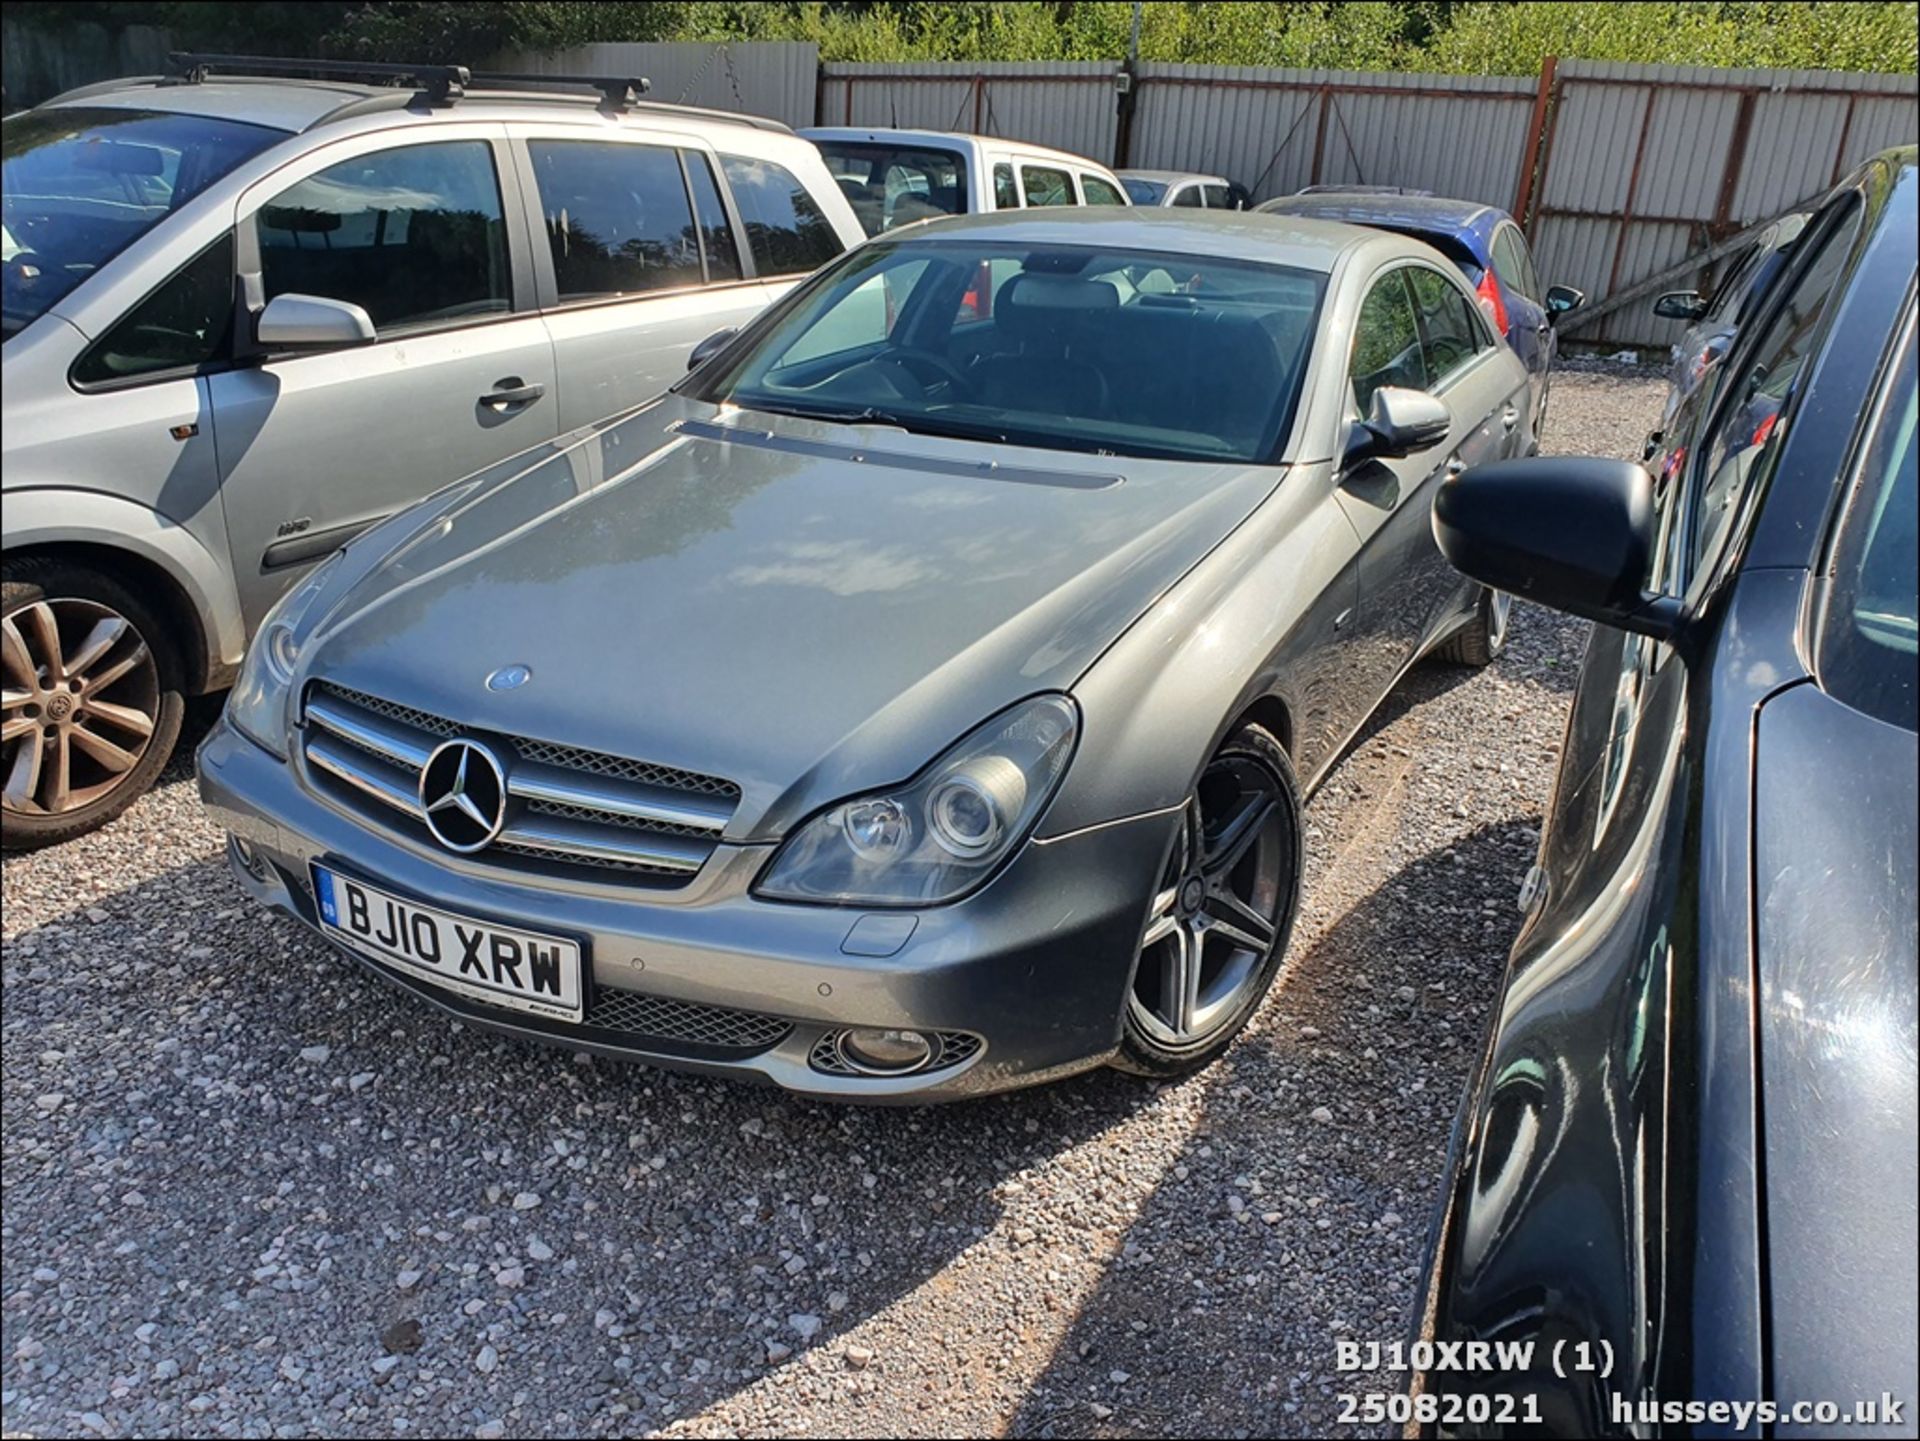 10/10 MERCEDES-BENZ CLS350 GRAND EDIT-N CDI A - 2987cc 2dr Coupe (Silver) - Image 2 of 18